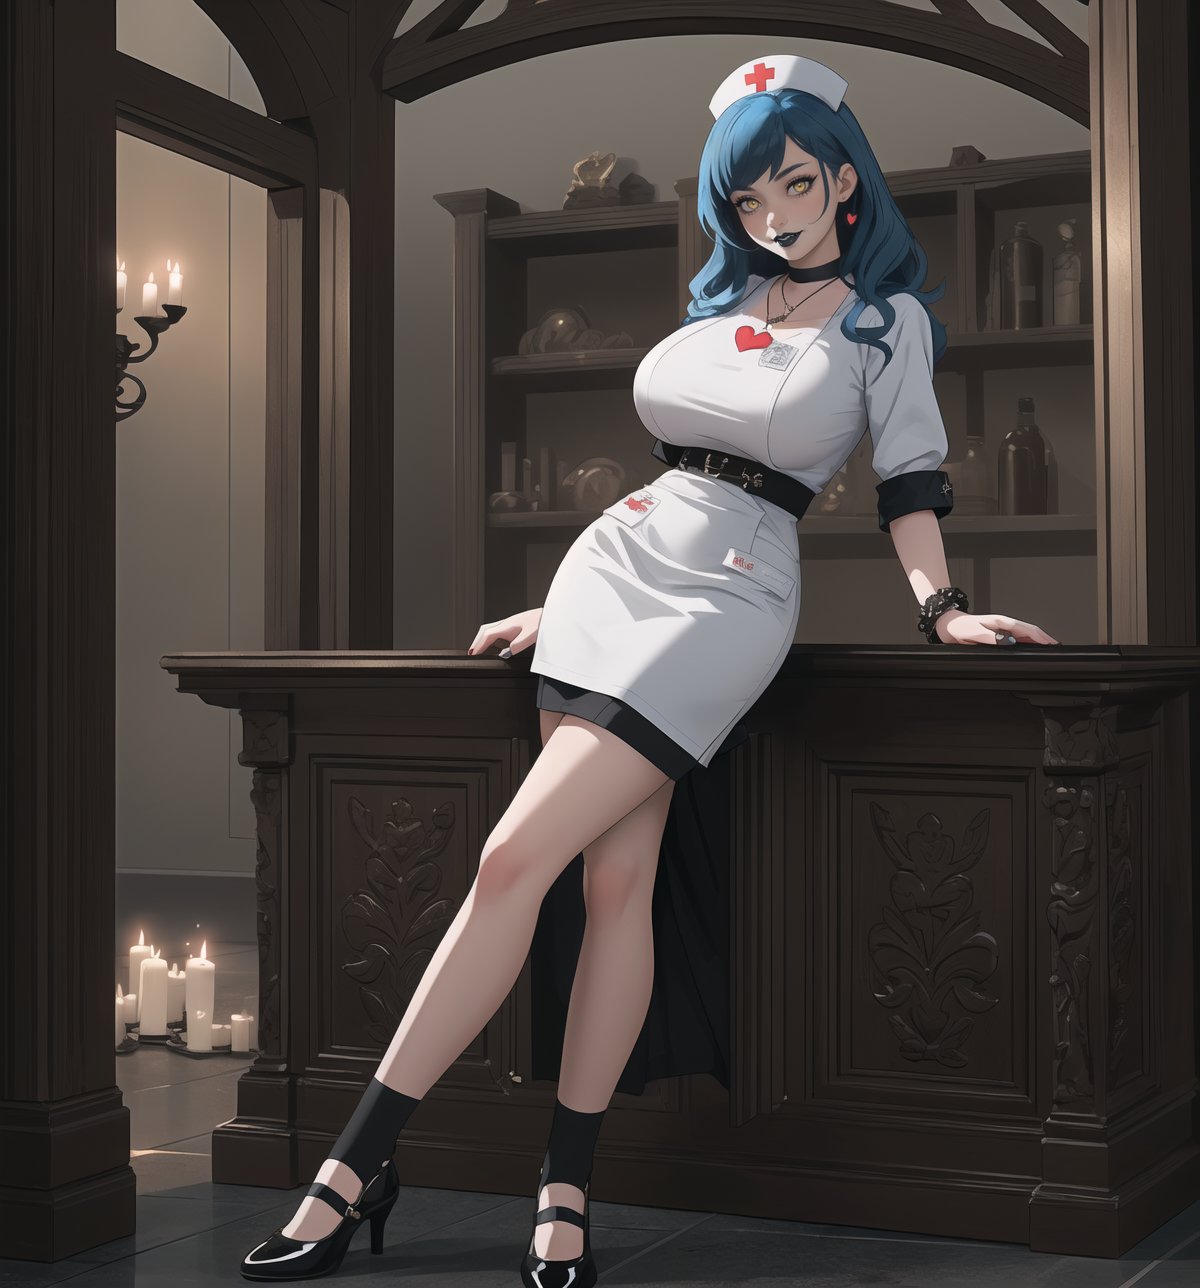 A nurse-gothic masterpiece with realistic details, rendered in ultra-high resolution. | A young woman, with blue hair and yellow eyes, is dressed in a nurse's outfit. The white dress with red details and the white apron with red details highlight her slender and careful figure. She also wears white socks, white low-heeled shoes, and accessories like a red heart pendant and a red leather bracelet, which add a layer of sweetness and affection to her appearance. ((The young woman smiles at the viewer, showing her white teeth and wearing black lipstick)), creating a charming contrast to her goth, nurse appearance. | The scene takes place in a macabre basement, lit by candles scattered throughout the room. The concrete, rock, wooden and metal structures create a spooky and mysterious atmosphere. The young woman stands out amidst this dark backdrop, adding a layer of beauty and fascination to the image. | Soft, moody lighting effects create a gothic mood, while detailed textures on clothing, accessories and set elements add realism to the masterpiece. | An intriguing and compelling scene of a young gothic nurse in a macabre basement, exploring themes of care, mystery, horror and beauty. | (((((The image reveals a full-body shot as she assumes a sensual pose, engagingly leaning against a structure within the scene in an exciting manner. She takes on a sensual pose as she interacts, boldly leaning on a structure, leaning back in an exciting way.))))). | ((full-body shot)), ((perfect pose)), ((perfect fingers, better hands, perfect hands)), ((perfect legs, perfect feet)), ((huge breasts)), ((perfect design)), ((perfect composition)), ((very detailed scene, very detailed background, perfect layout, correct imperfections)), More Detail, Enhance,